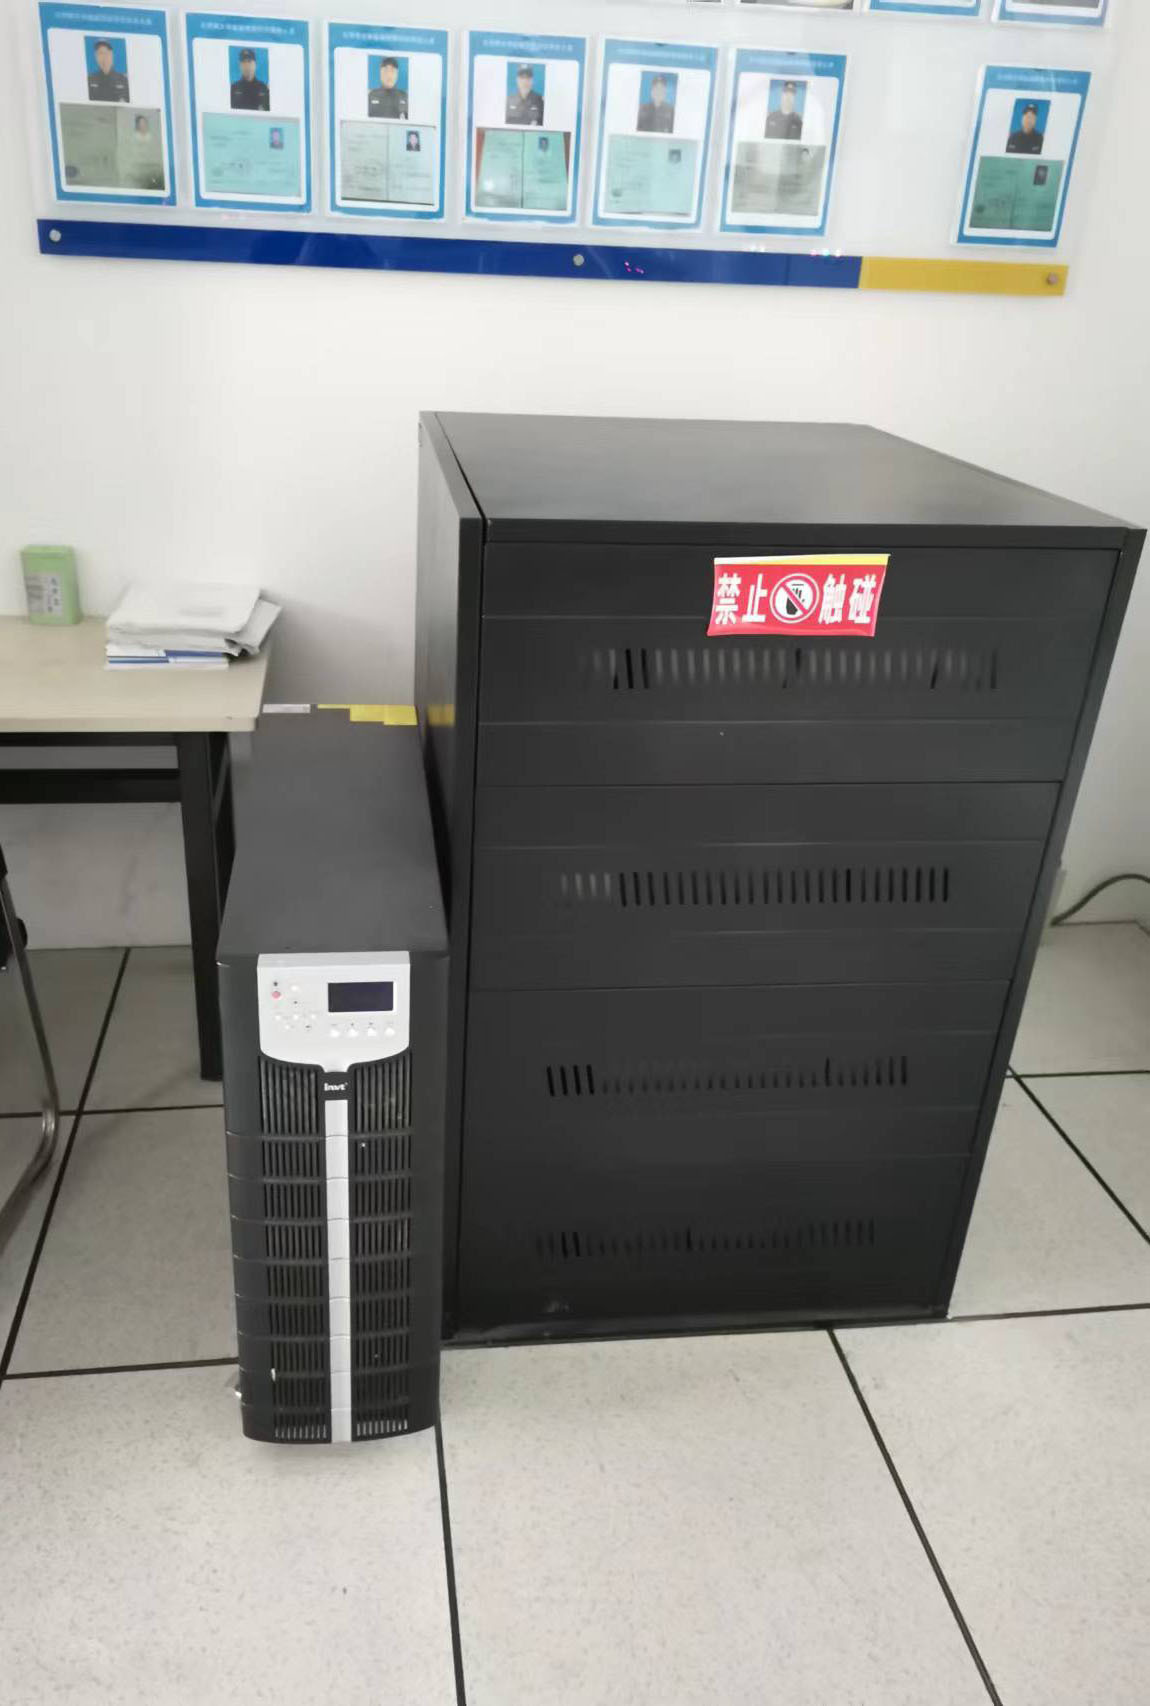 HT33040XL use in Yancheng School Affiliated To Beijing Normal University project 2 -- INVT power